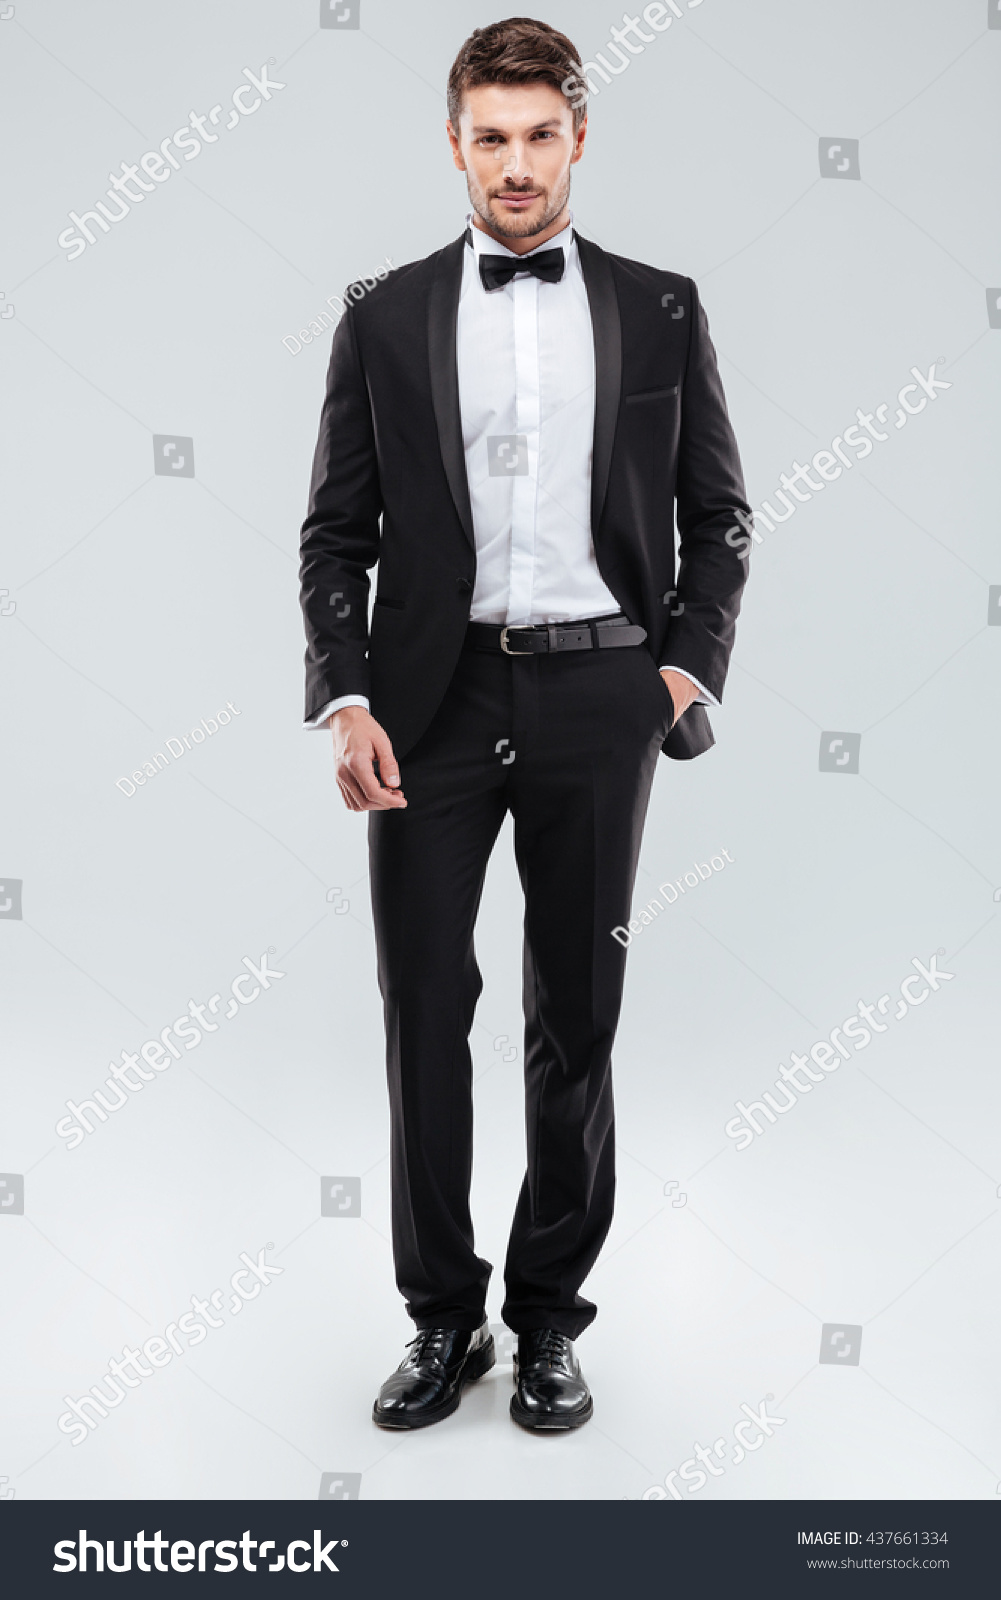 Confident Attractive Young Man Tuxedo Standing Stock Photo 437661334 ...